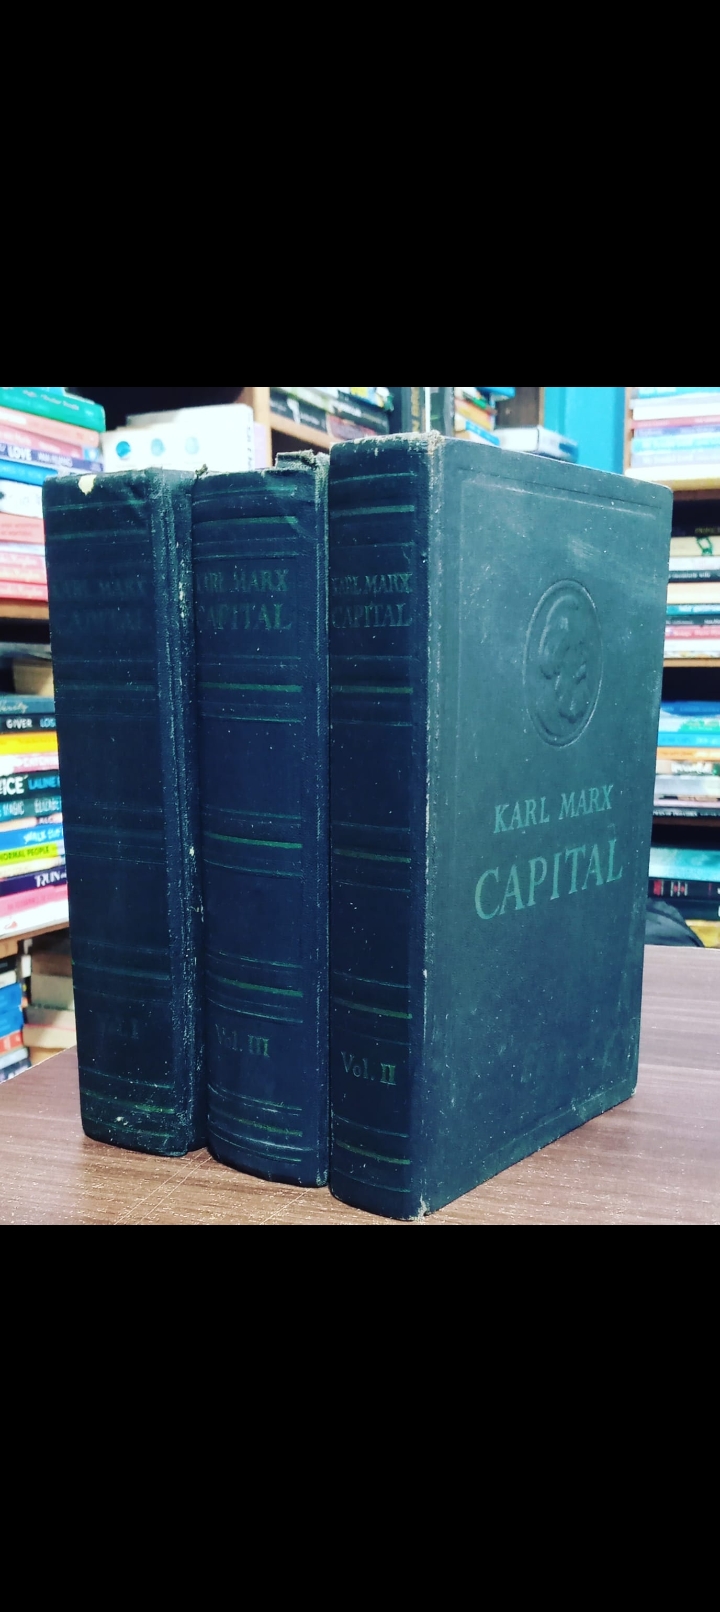 karl marx capital complete 3 volume original hardcover cod available delivery free.